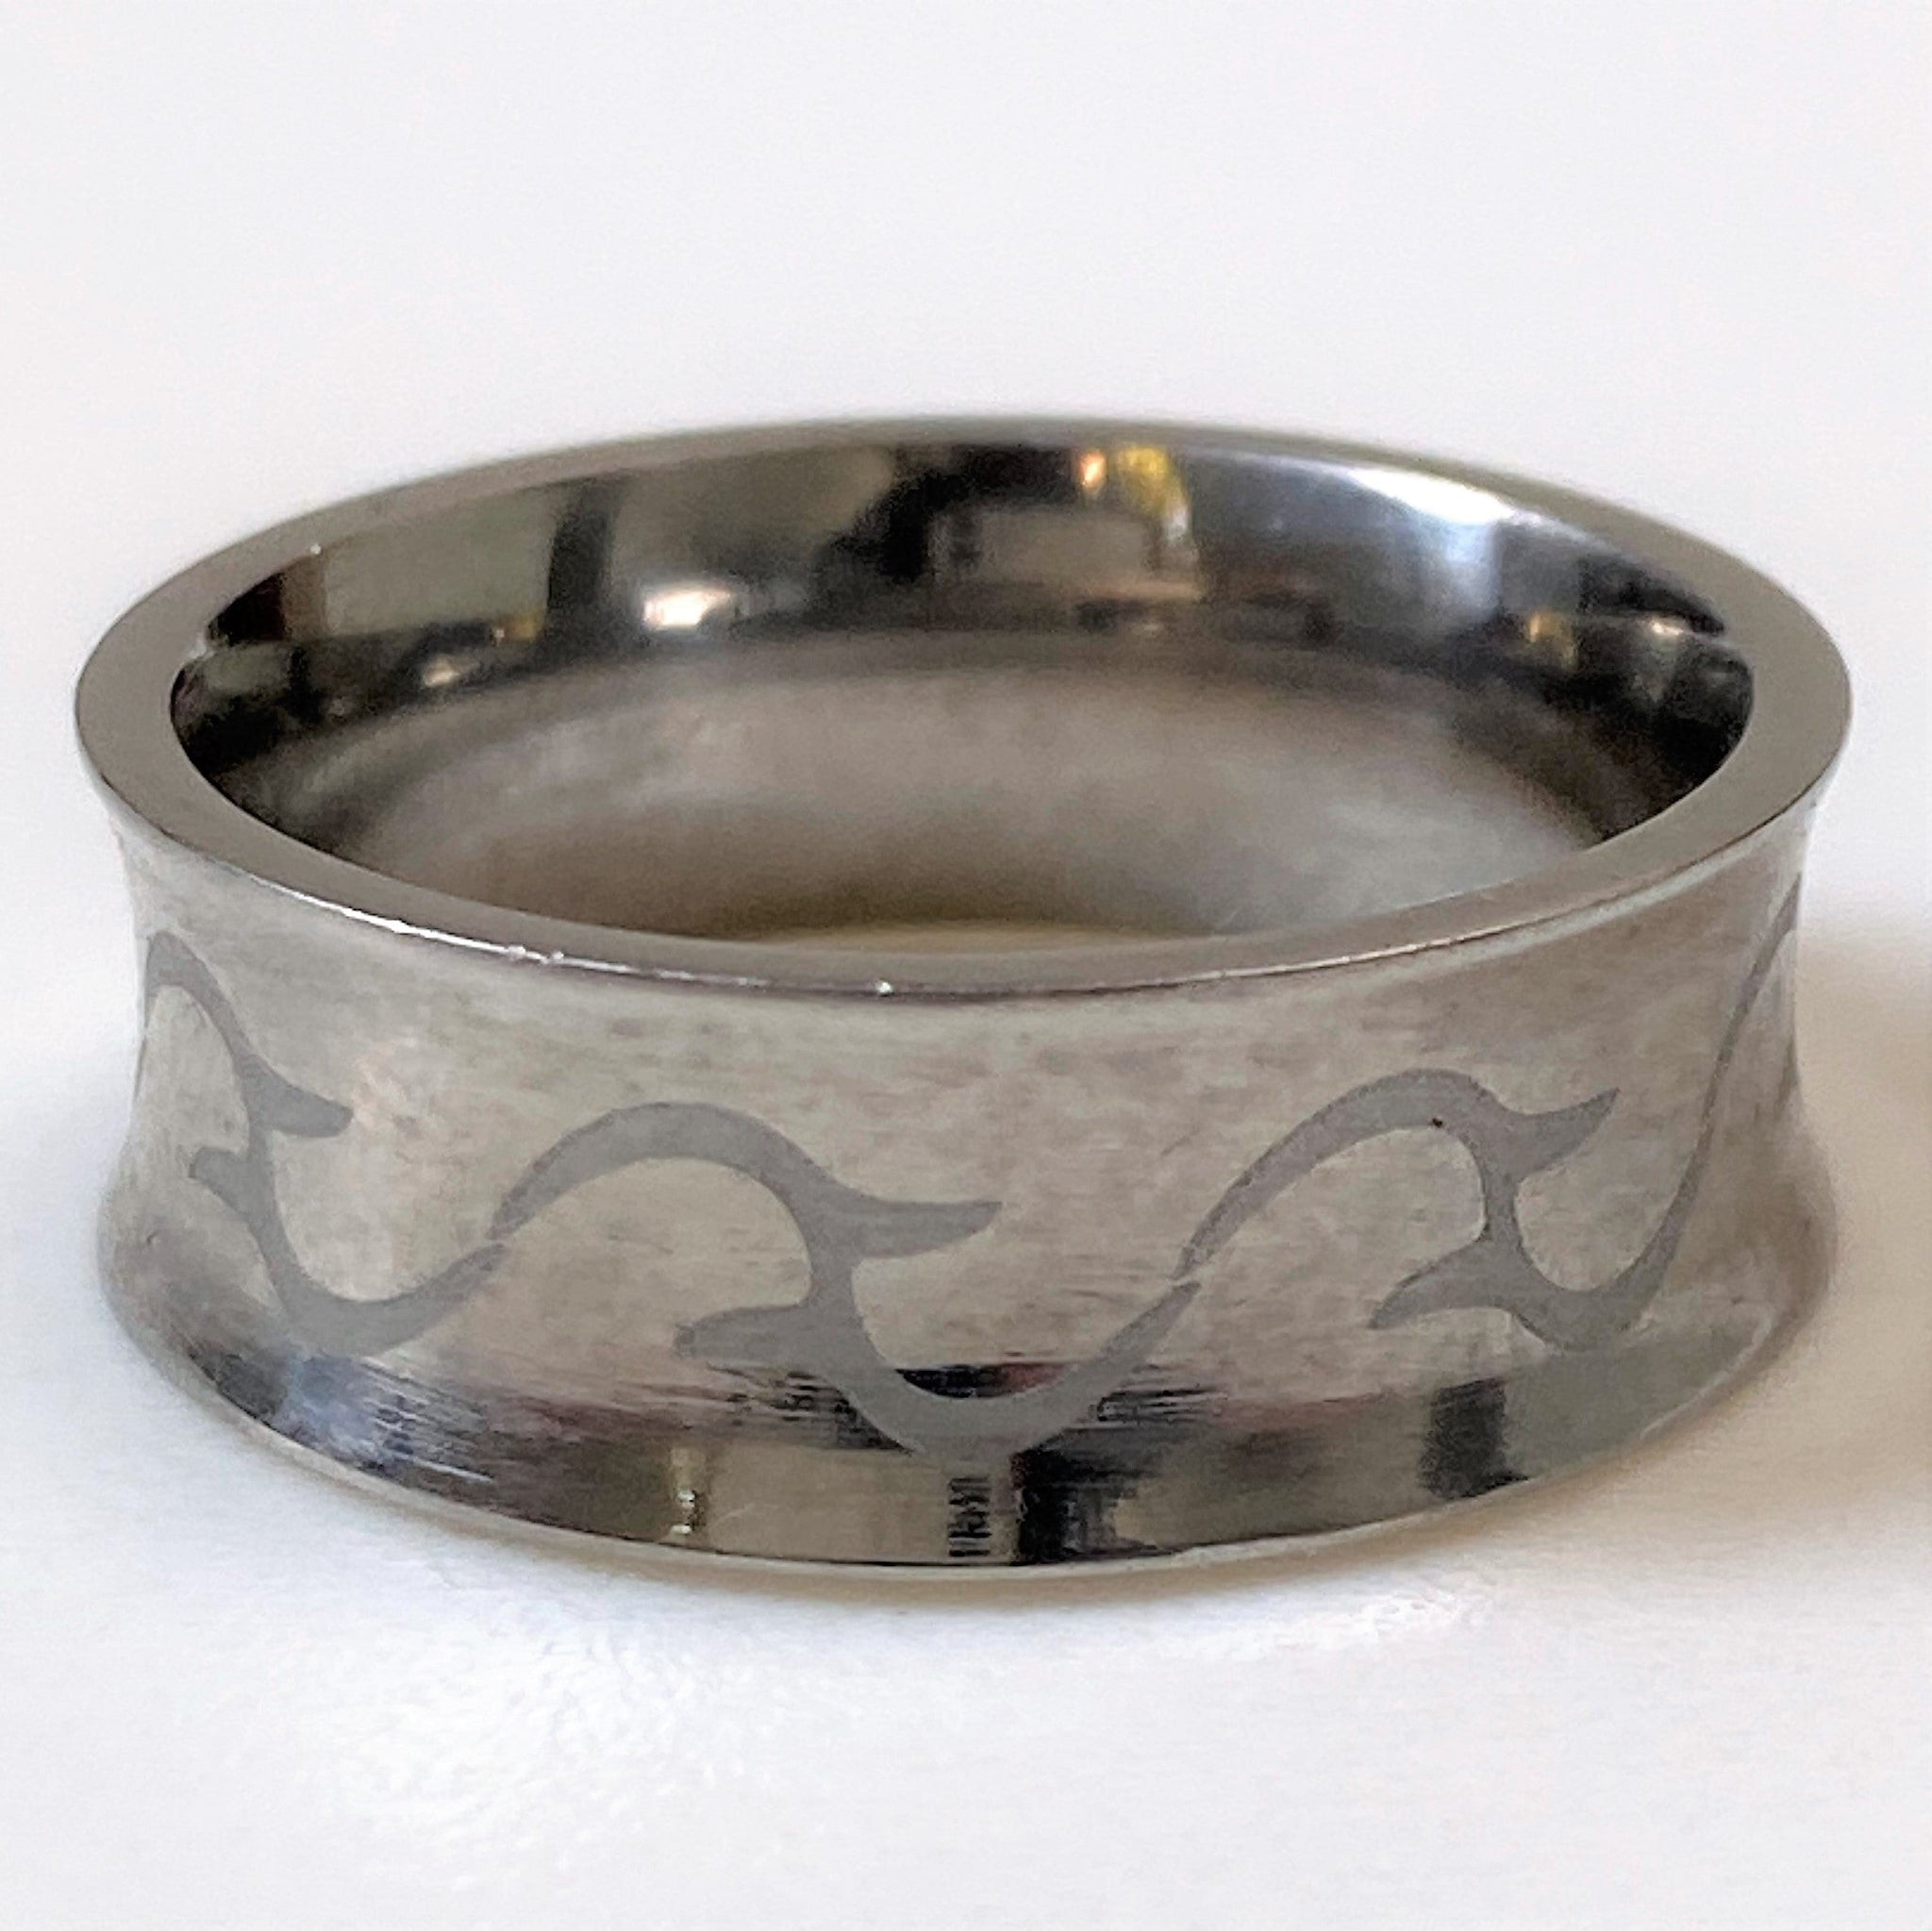 Stainless Steel Men’s Ring with Etched Design